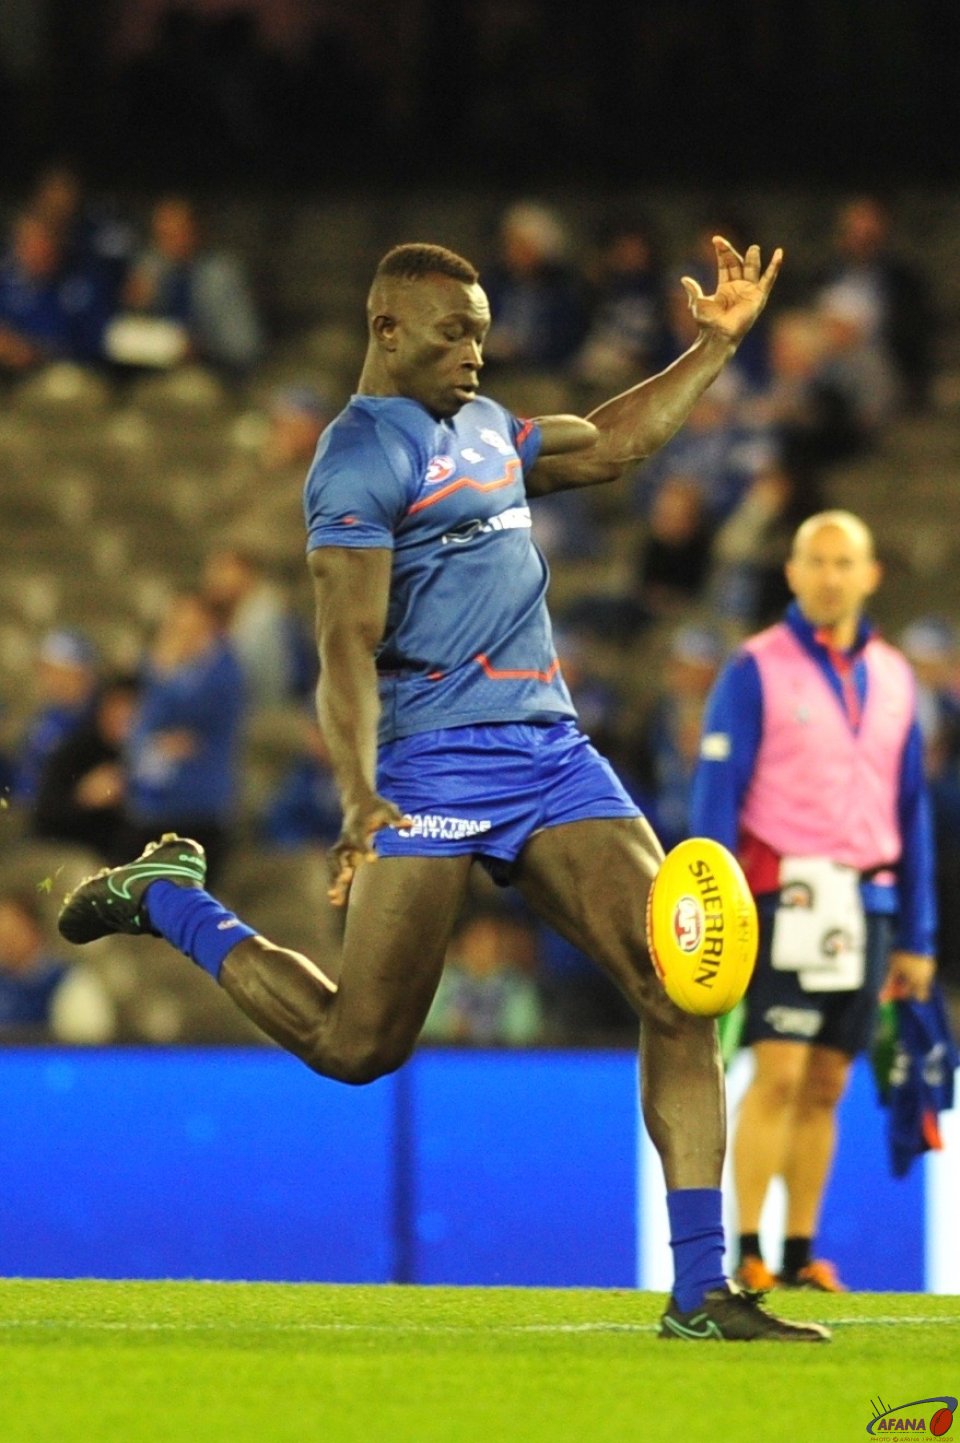 Majak Daw shoots and scores